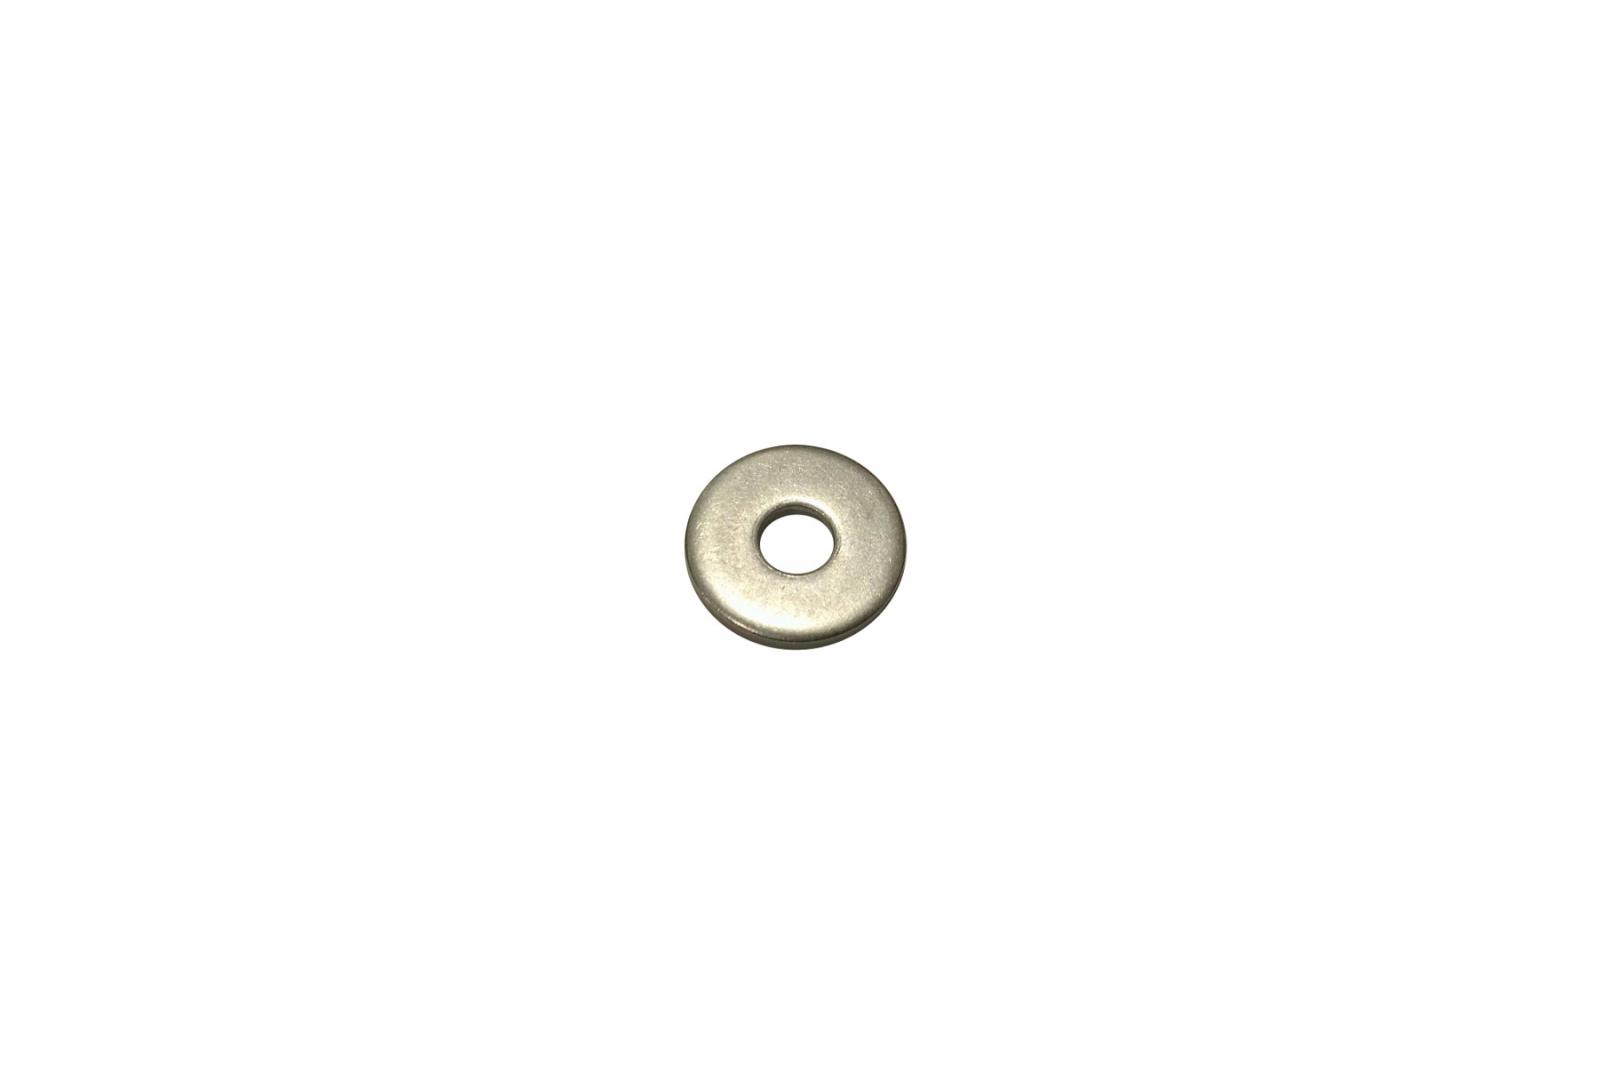 NorthStar™ Thick Flat Washer. Part number SHW-086